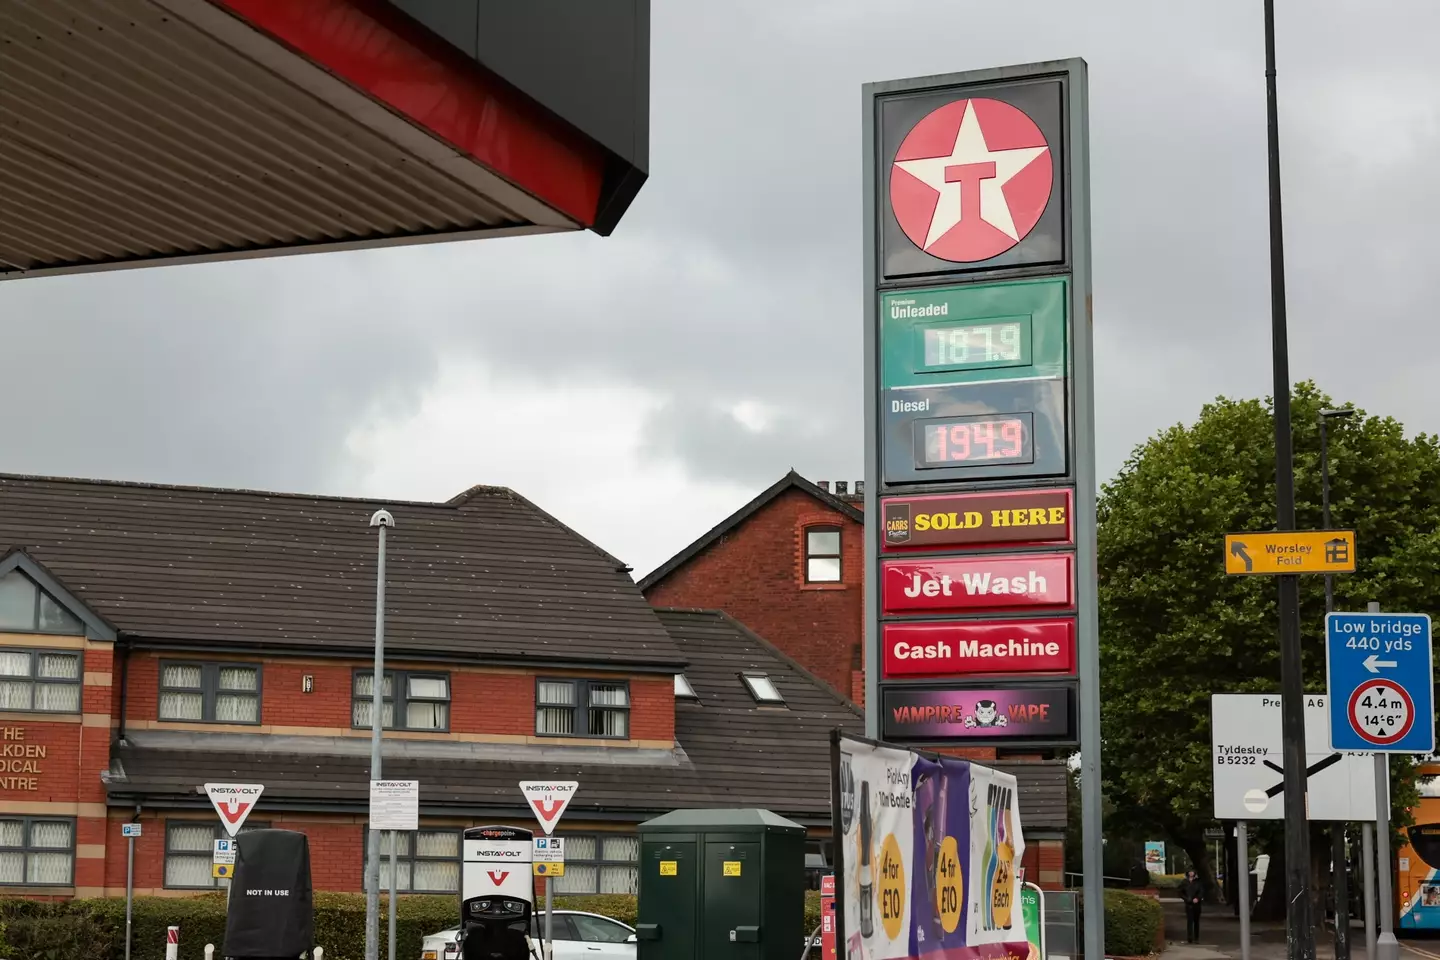 The 'cheapest' petrol station in the UK!